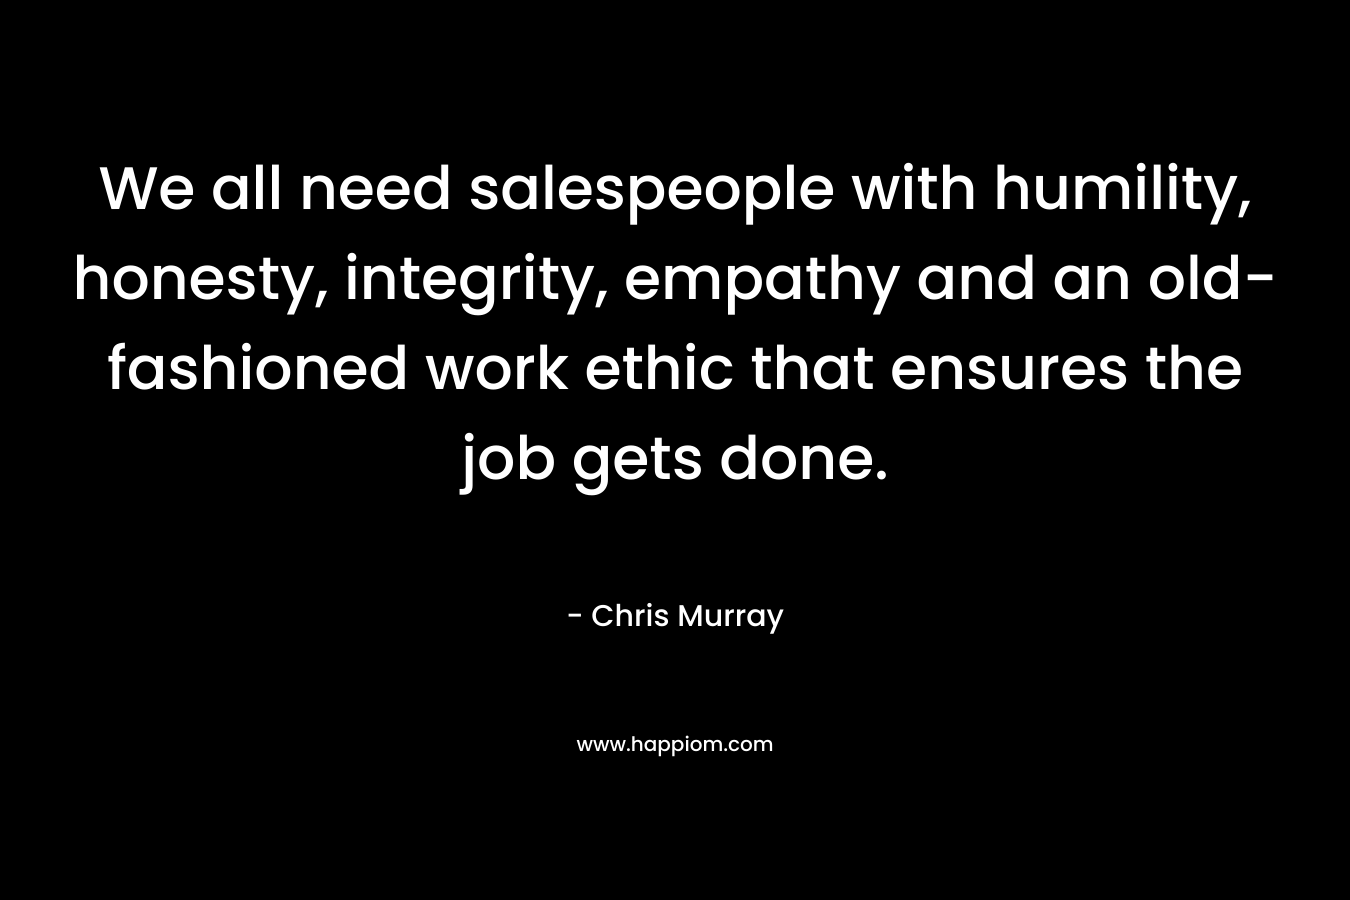 We all need salespeople with humility, honesty, integrity, empathy and an old-fashioned work ethic that ensures the job gets done.